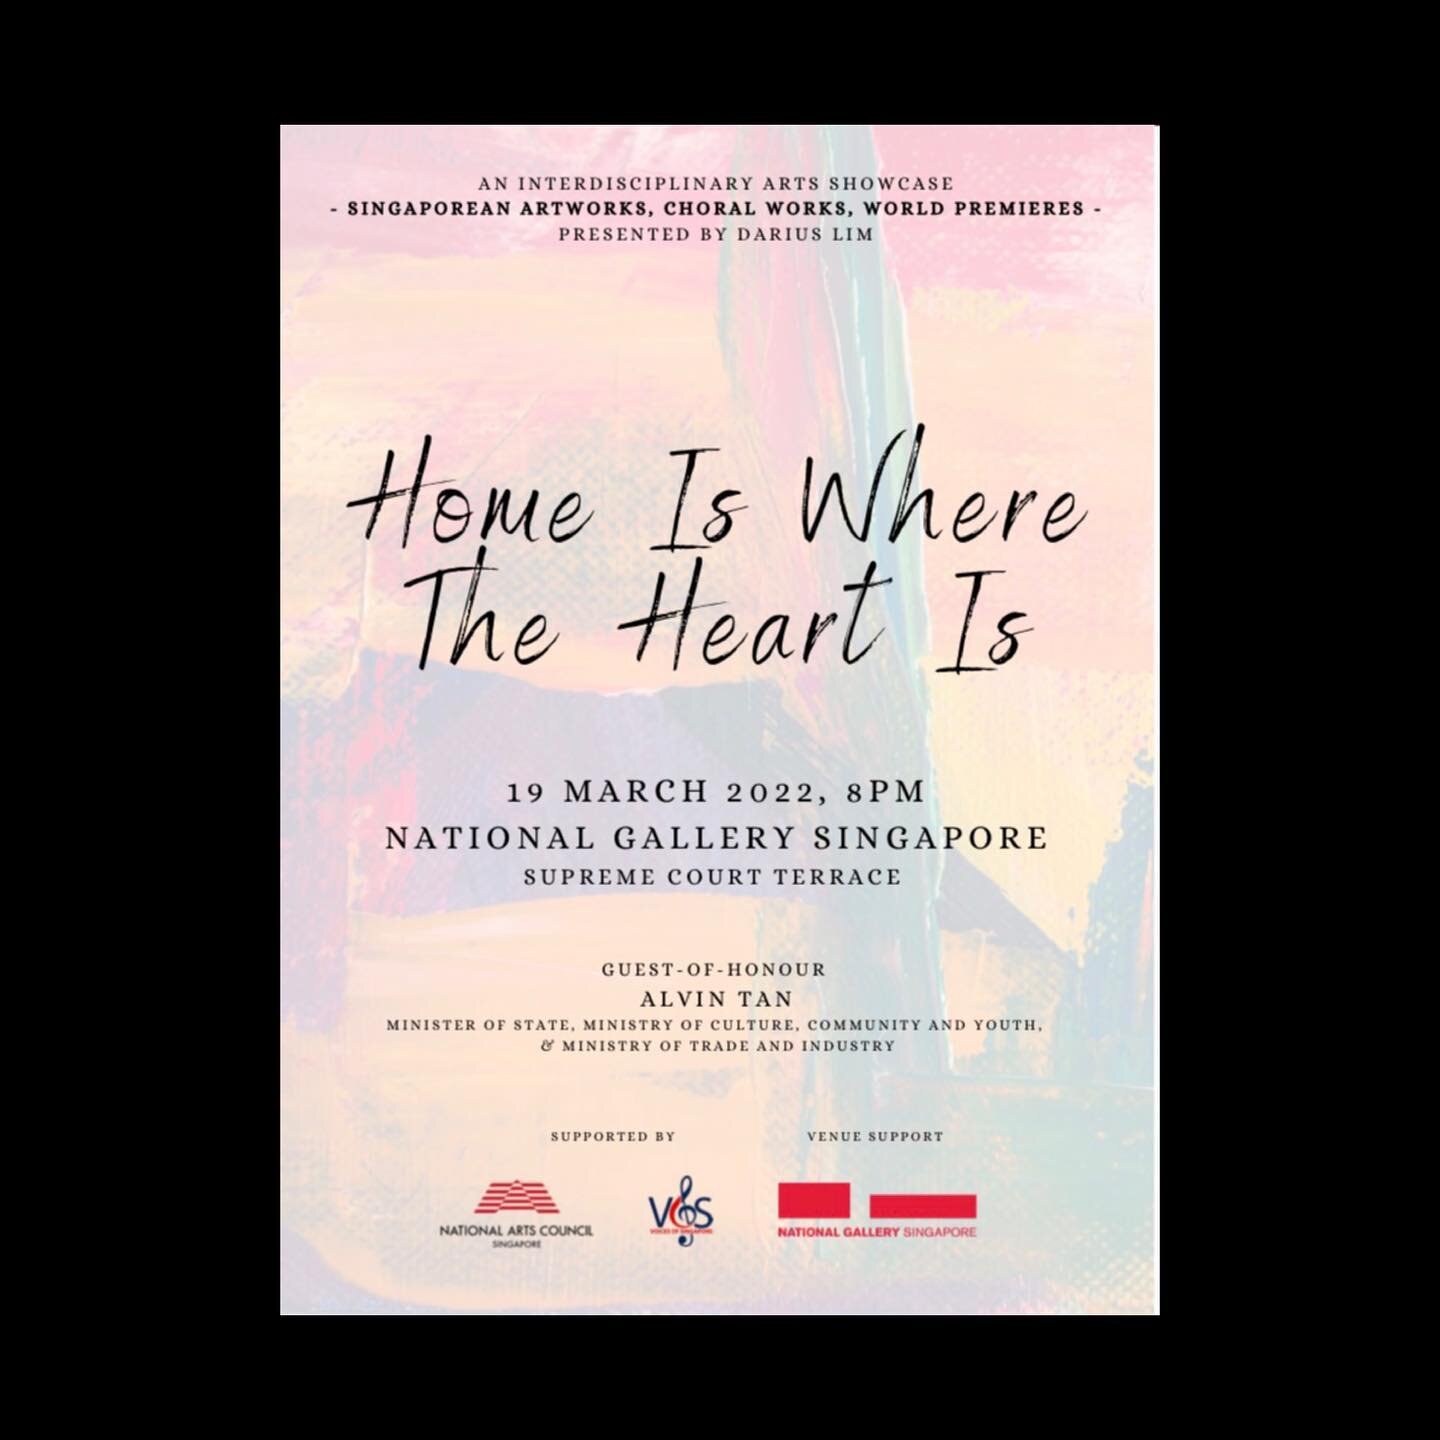 Super excited for the first ever interdisciplinary arts showcase - Home is Where The Heart Is, presented by the Voices of Singapore. 

It&rsquo;s a wonderful collaboration of art and music - 
Commissioning four unique artworks to be created by four l